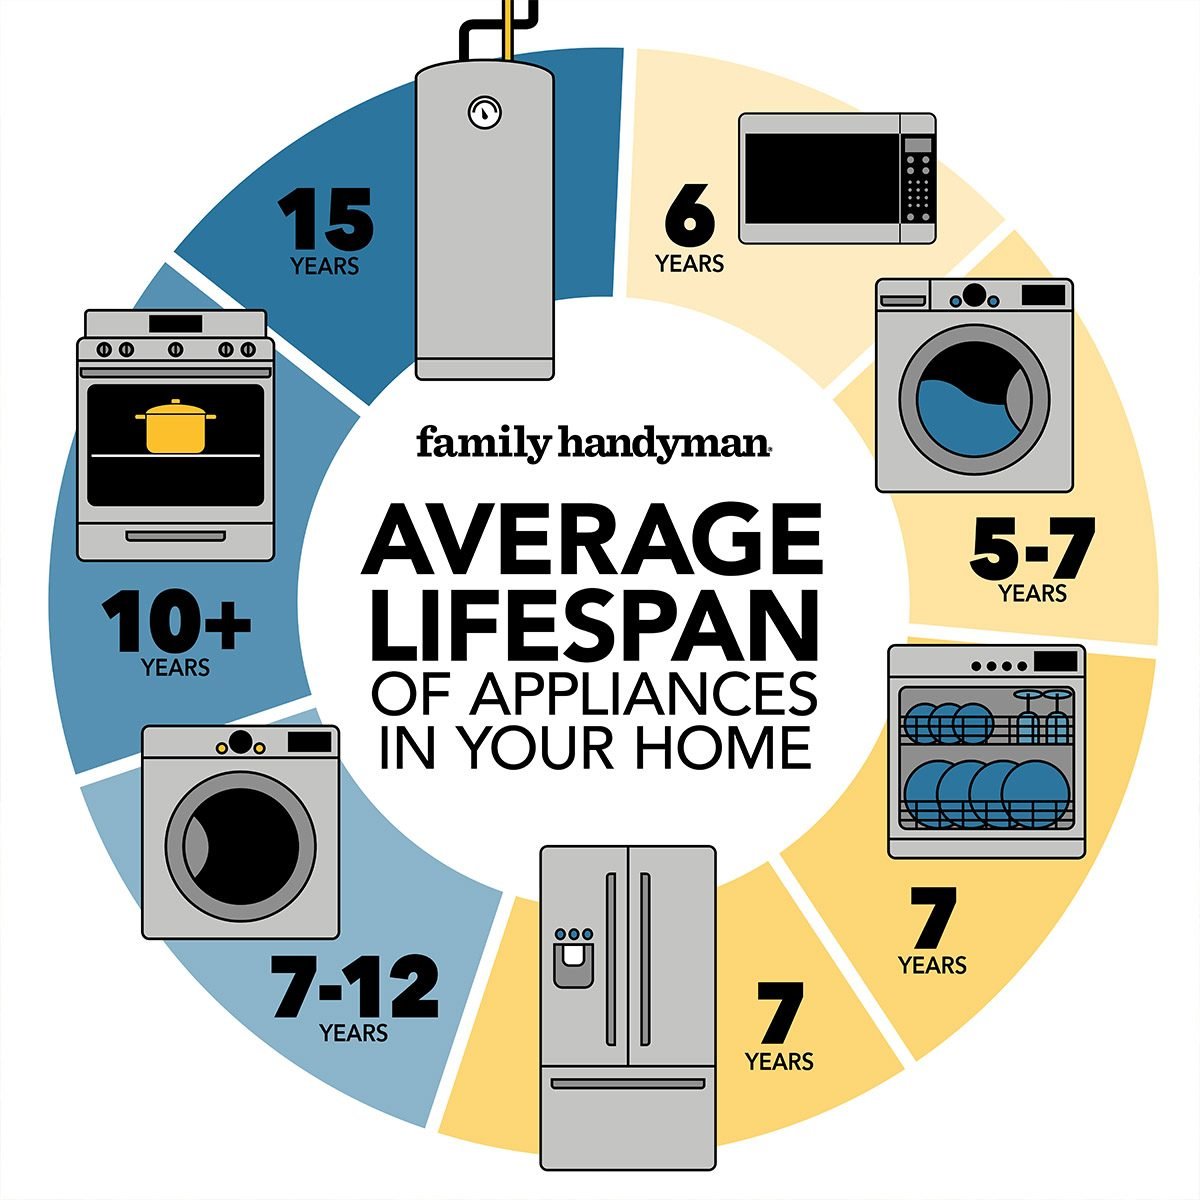 How Long Do the Appliances Last in Your Home?